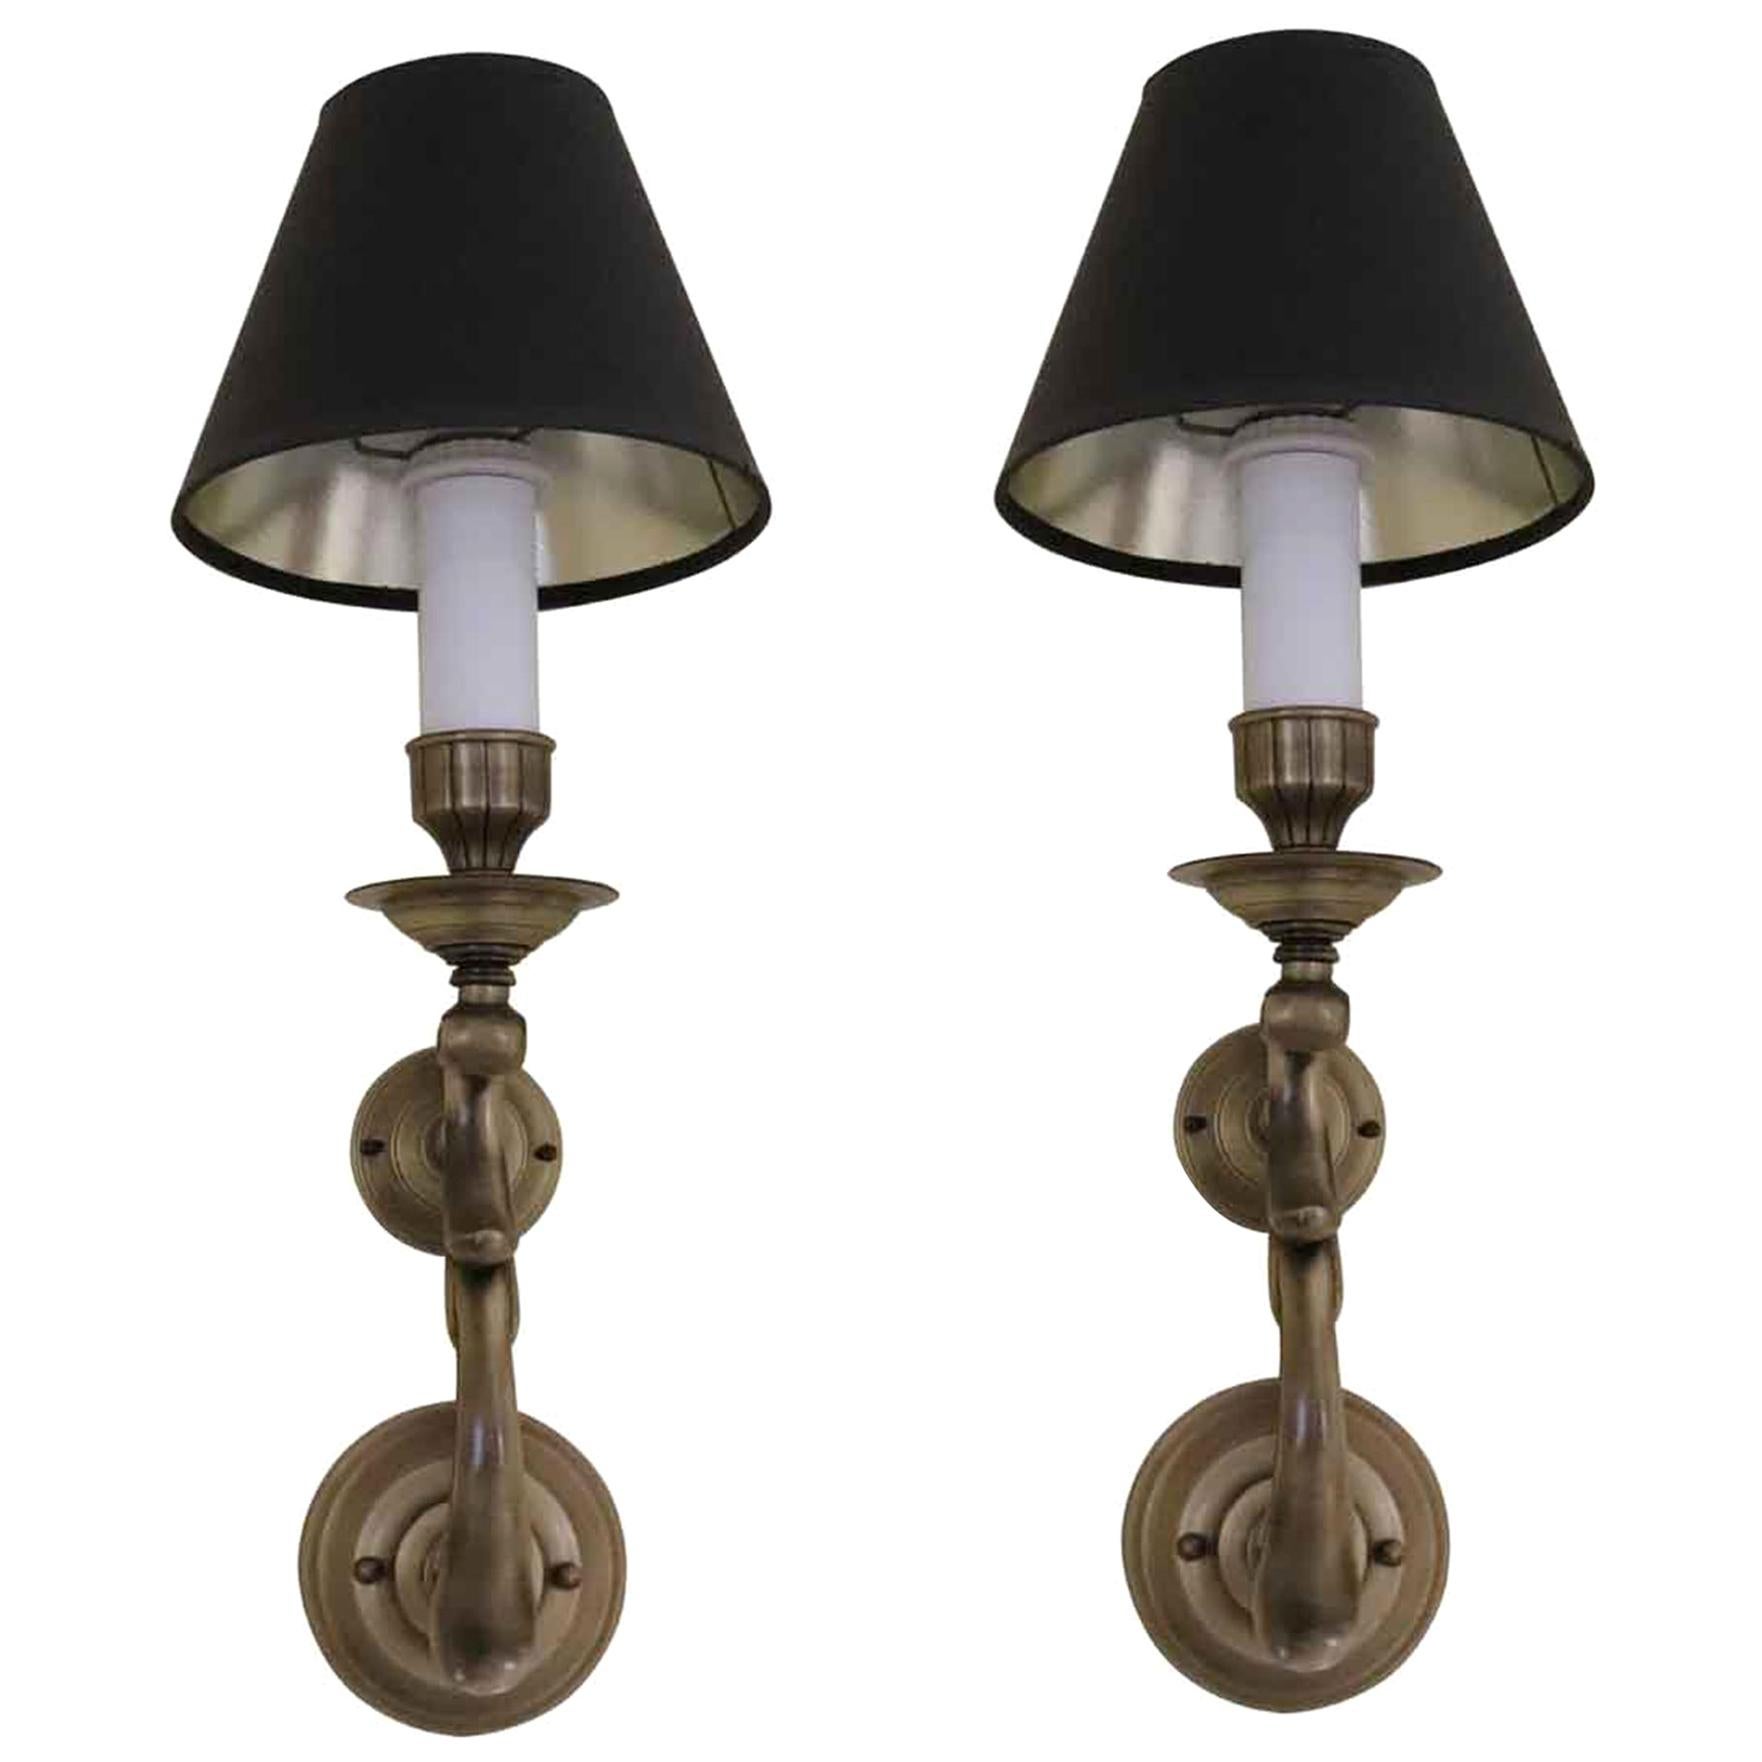 1980s Pair of NYC Waldorf Astoria Hotel Brass Sconces with Black Shades